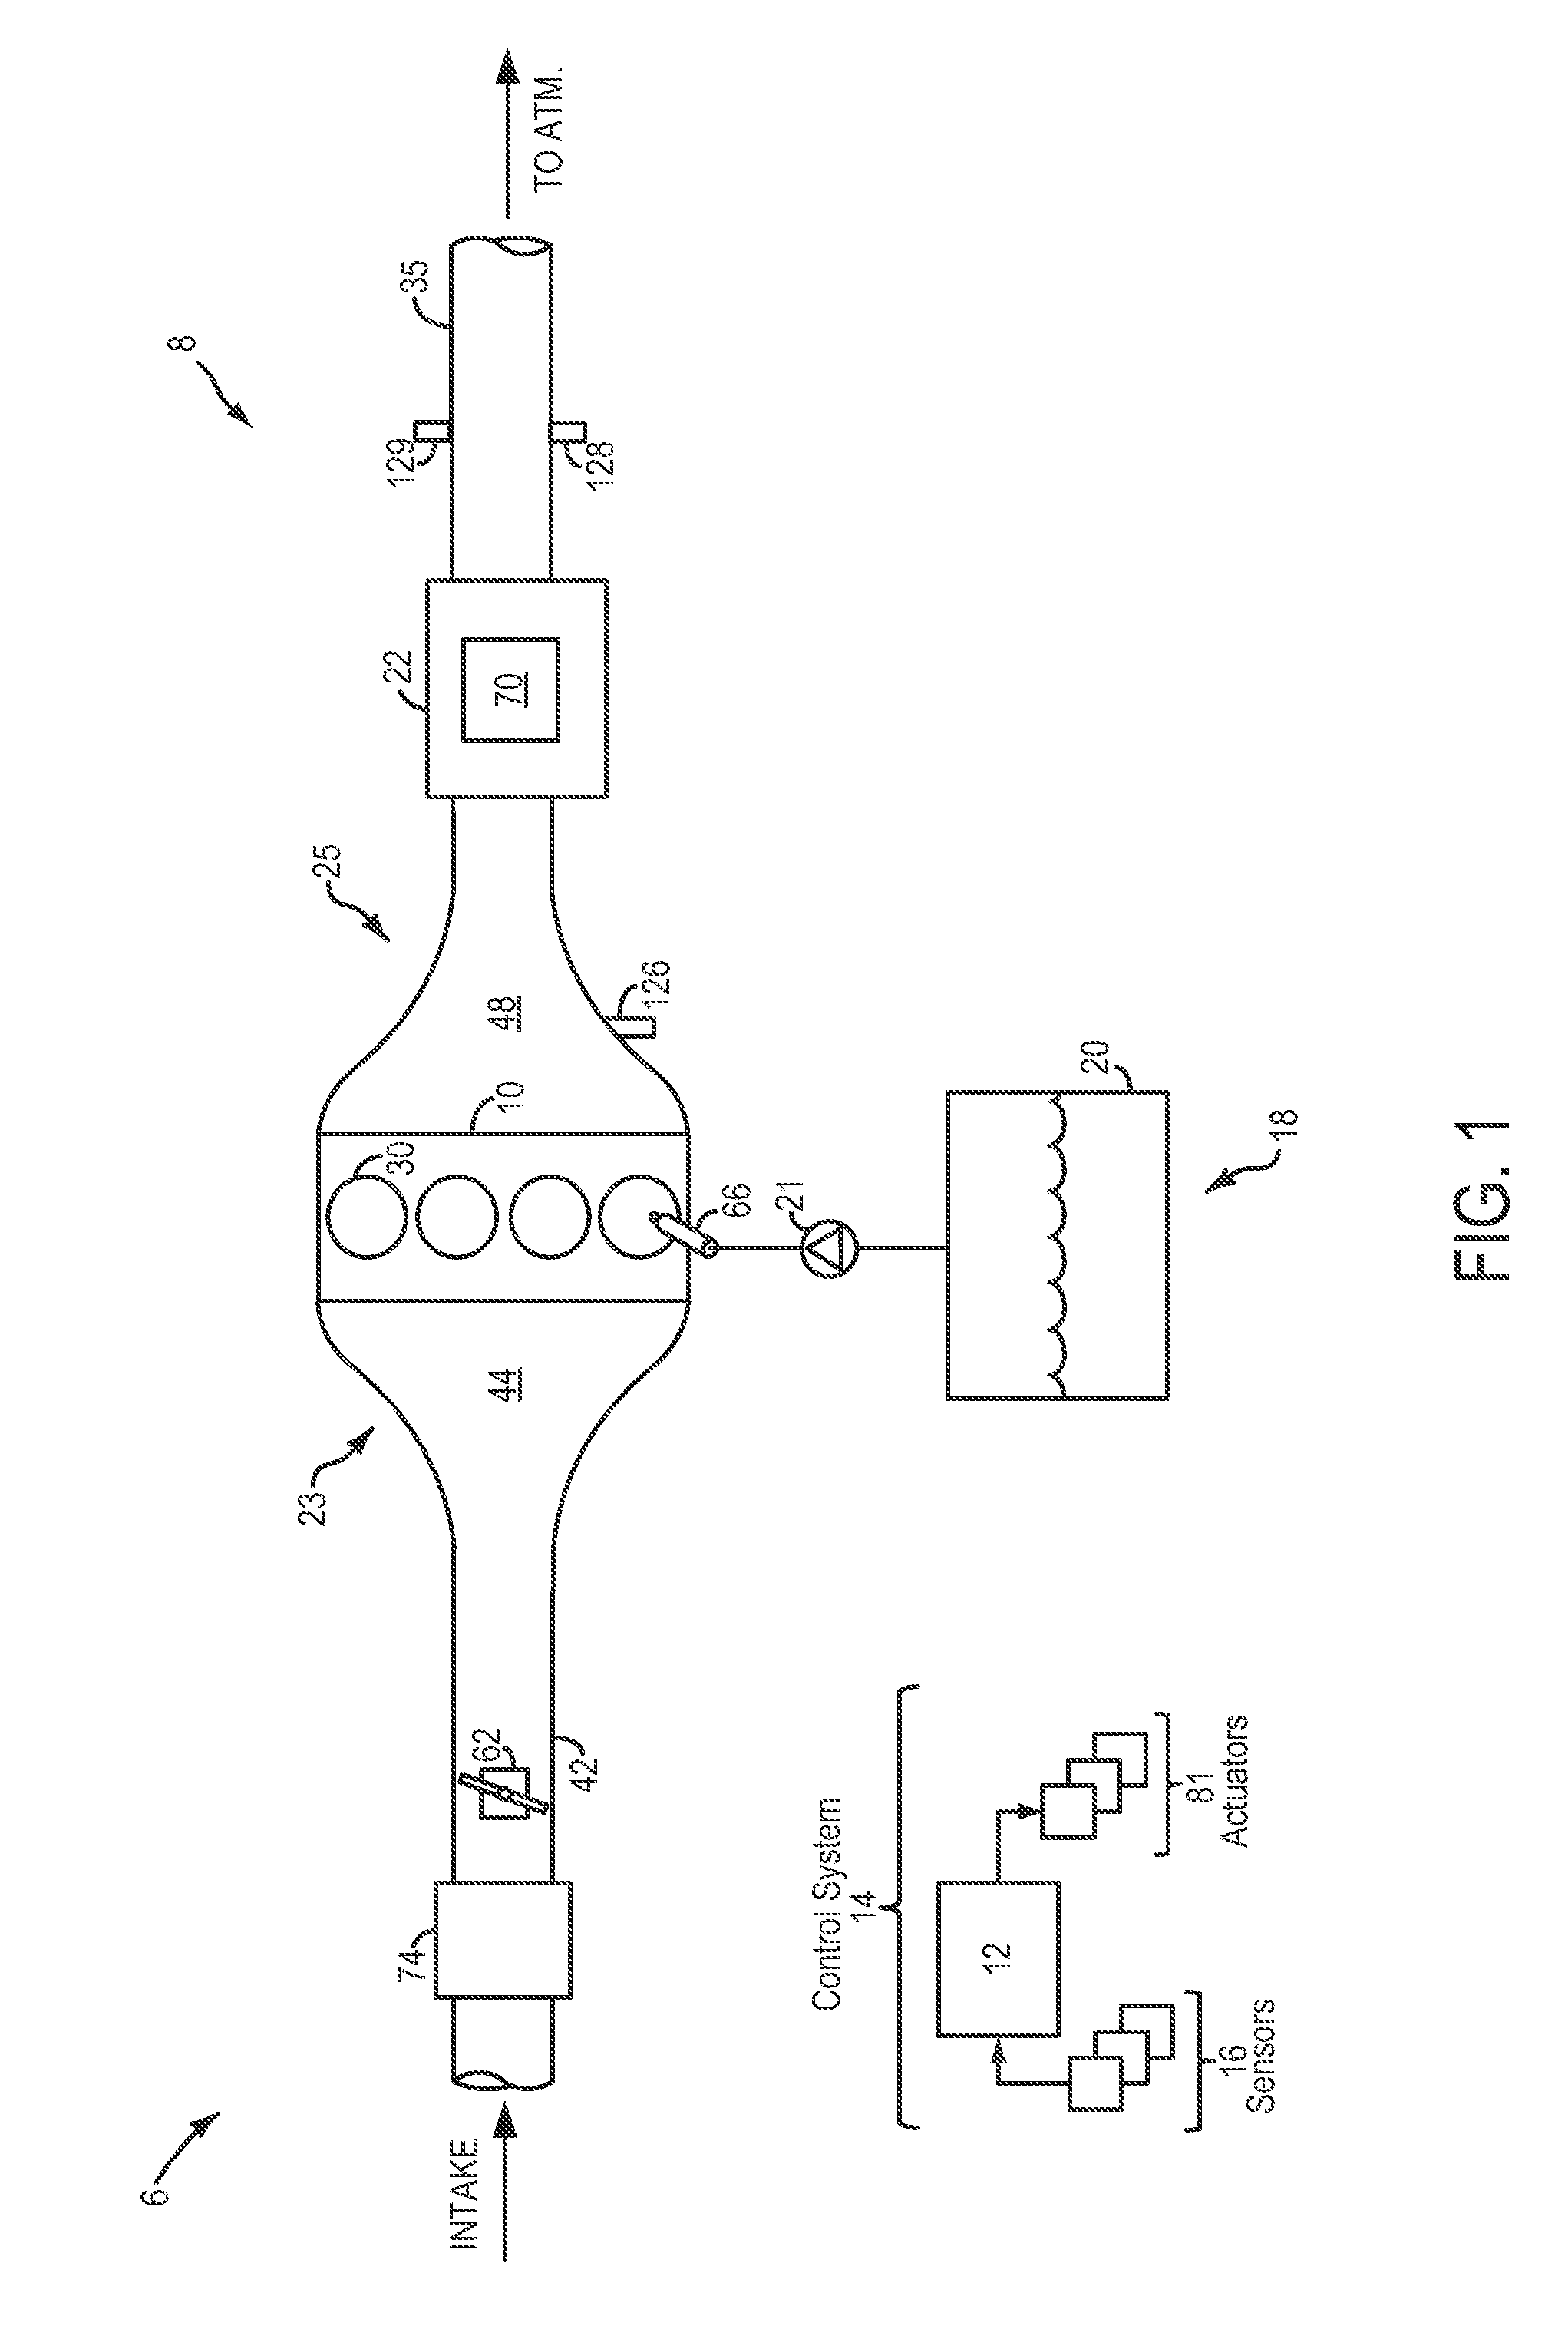 Methods and systems for an engine emission control system